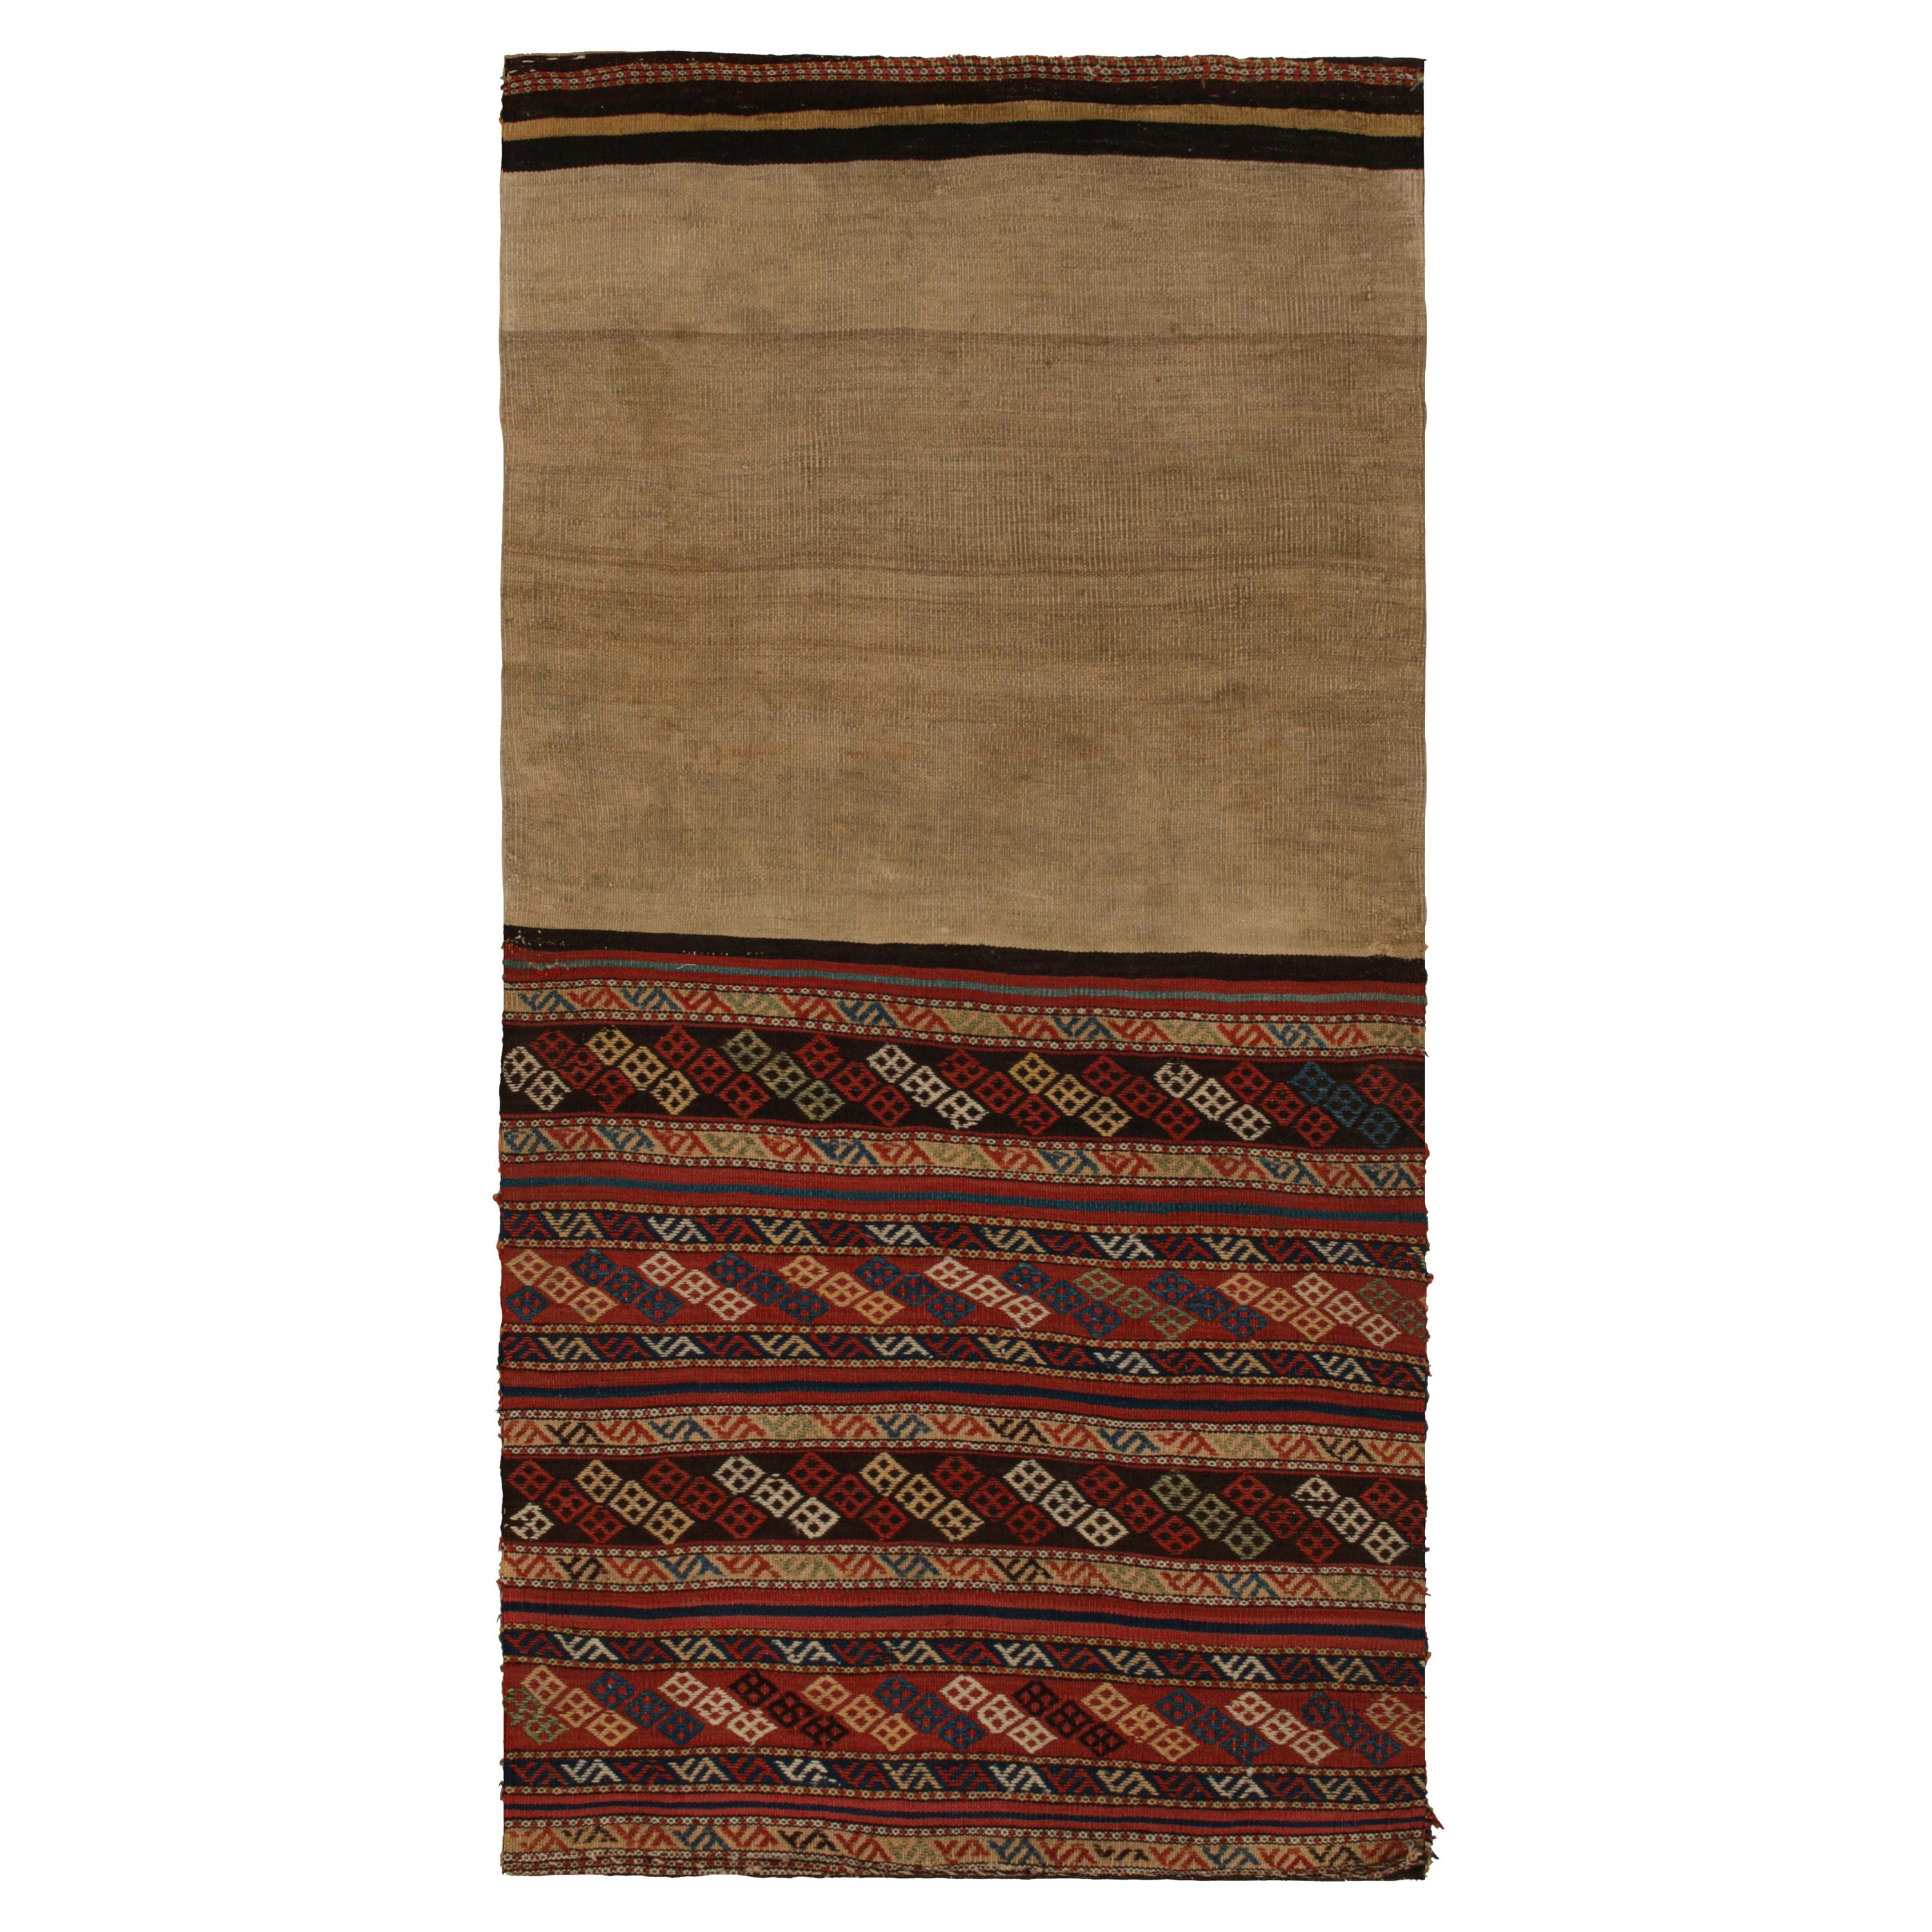 Antique Persian Bag Kilim Runner with Geometric Patterns, from Rug & Kilim For Sale